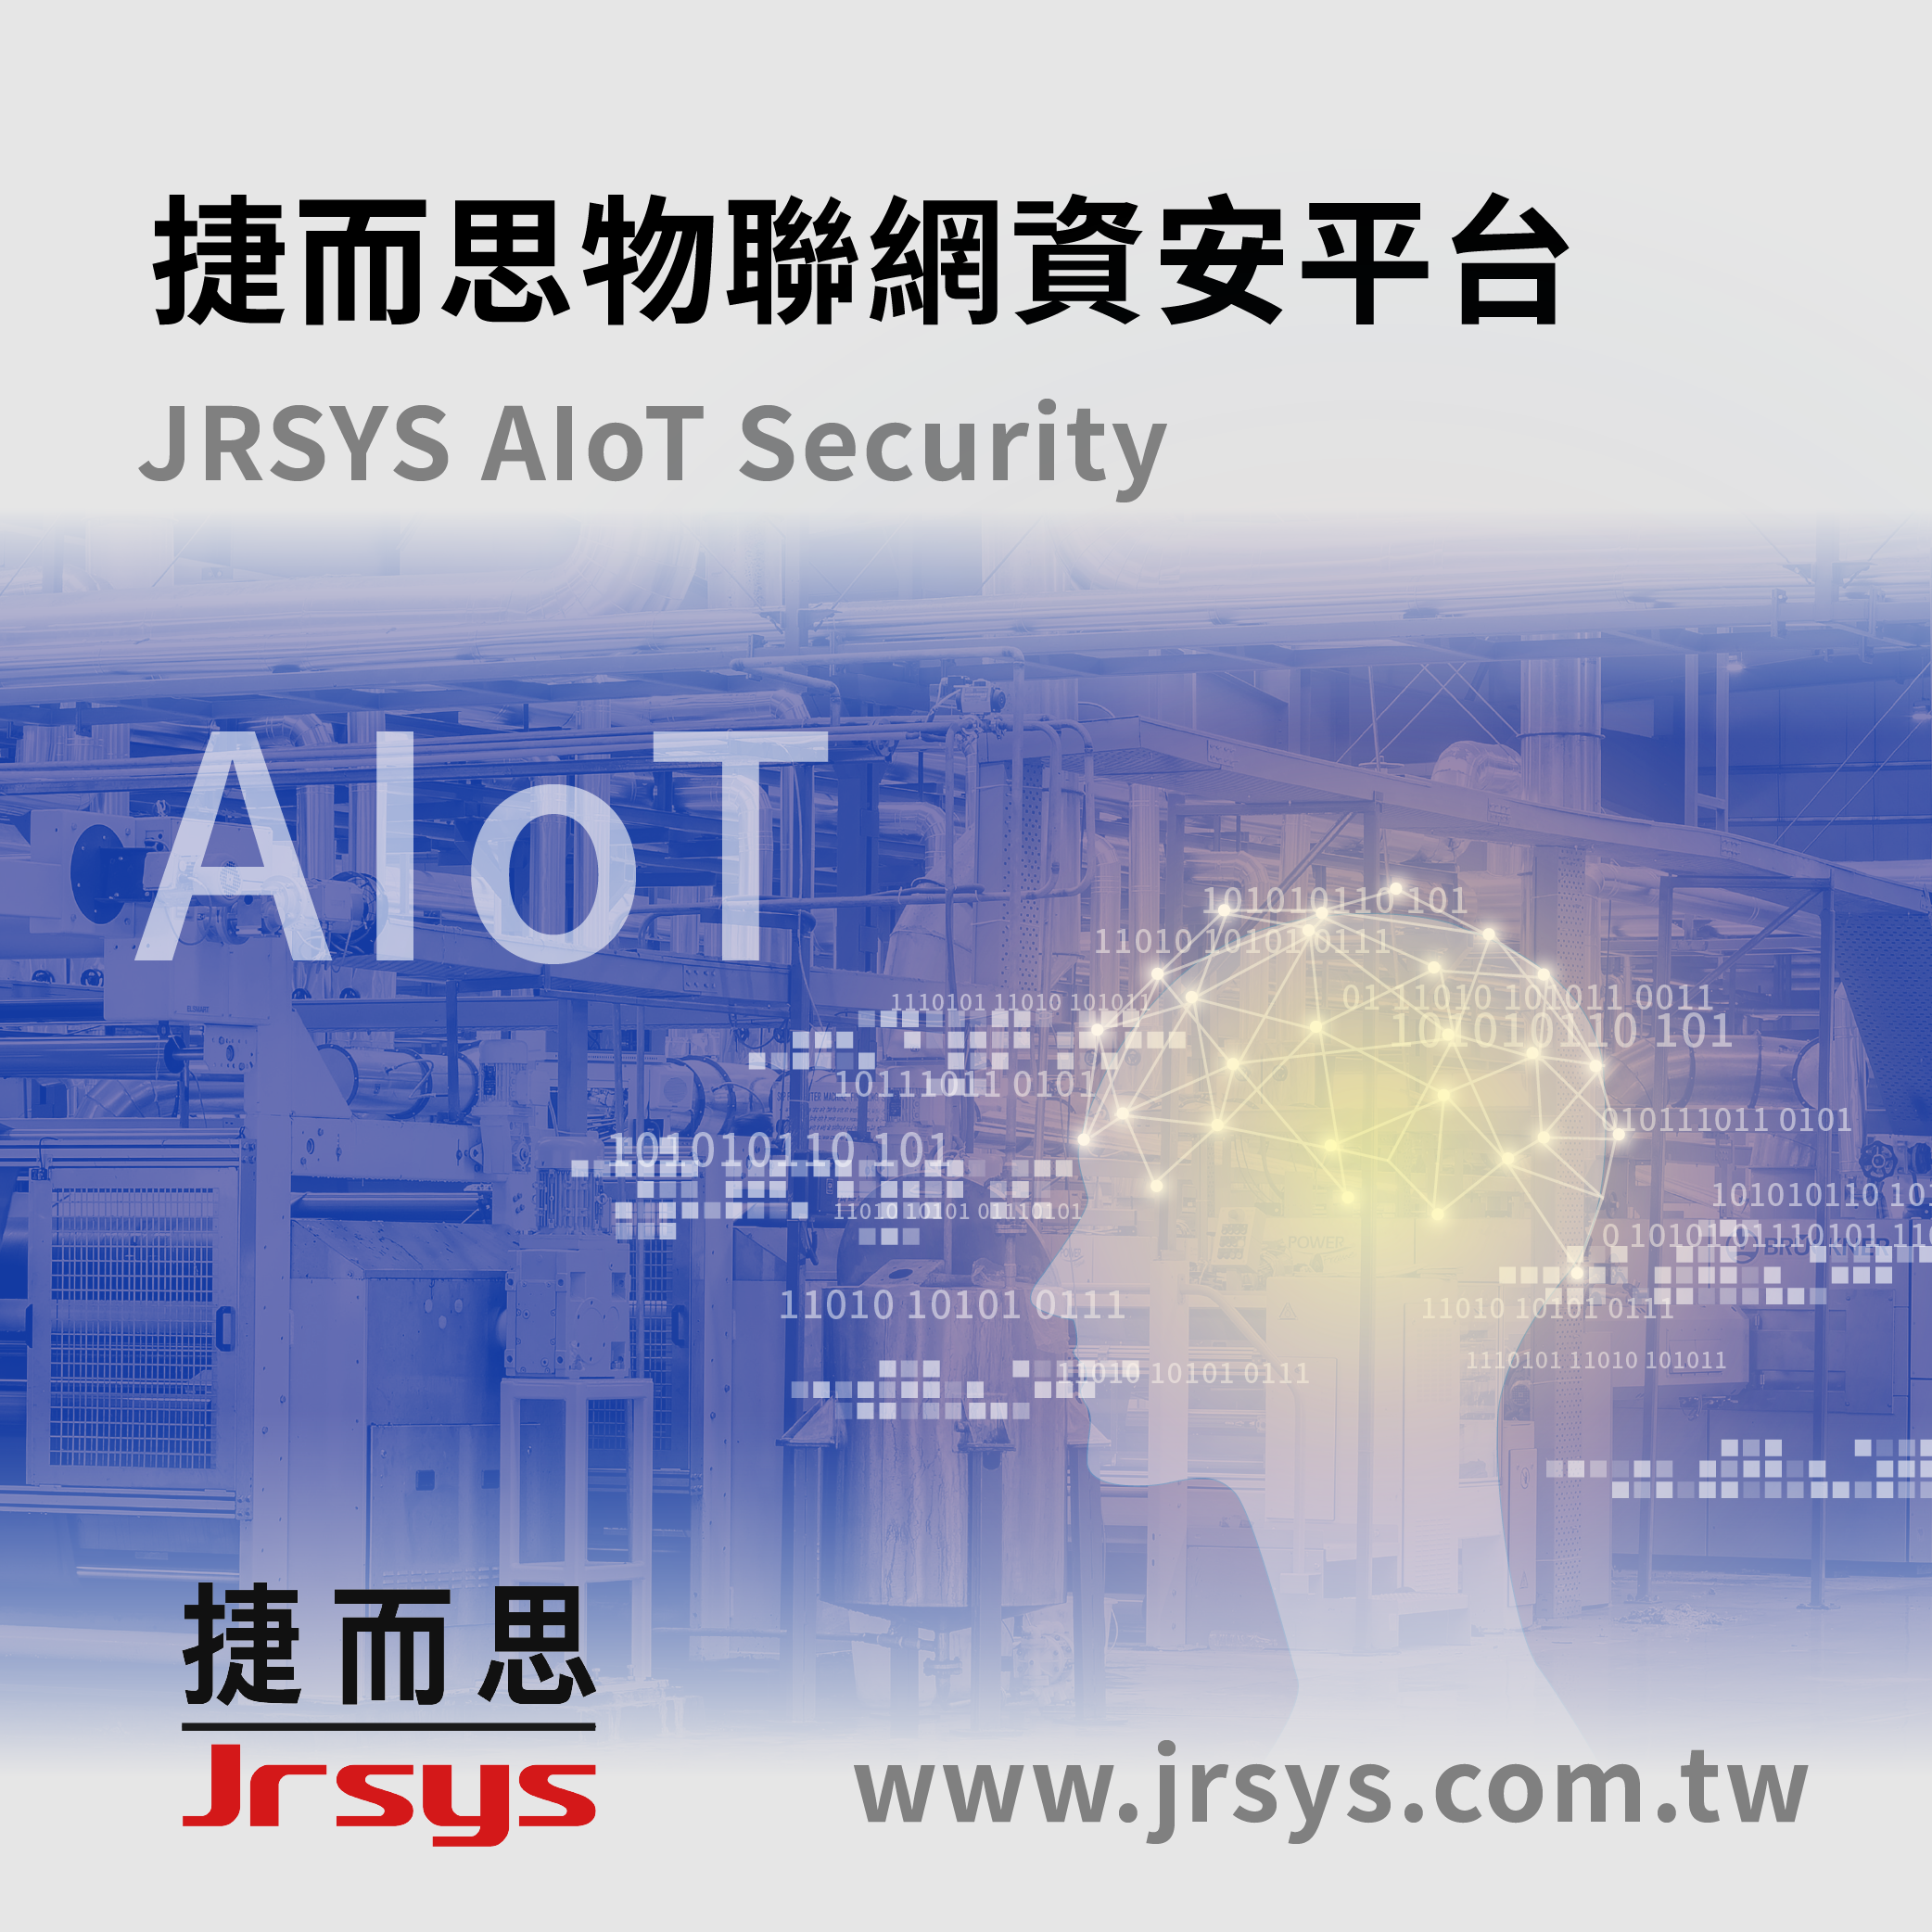 JRSYS AIoT Security